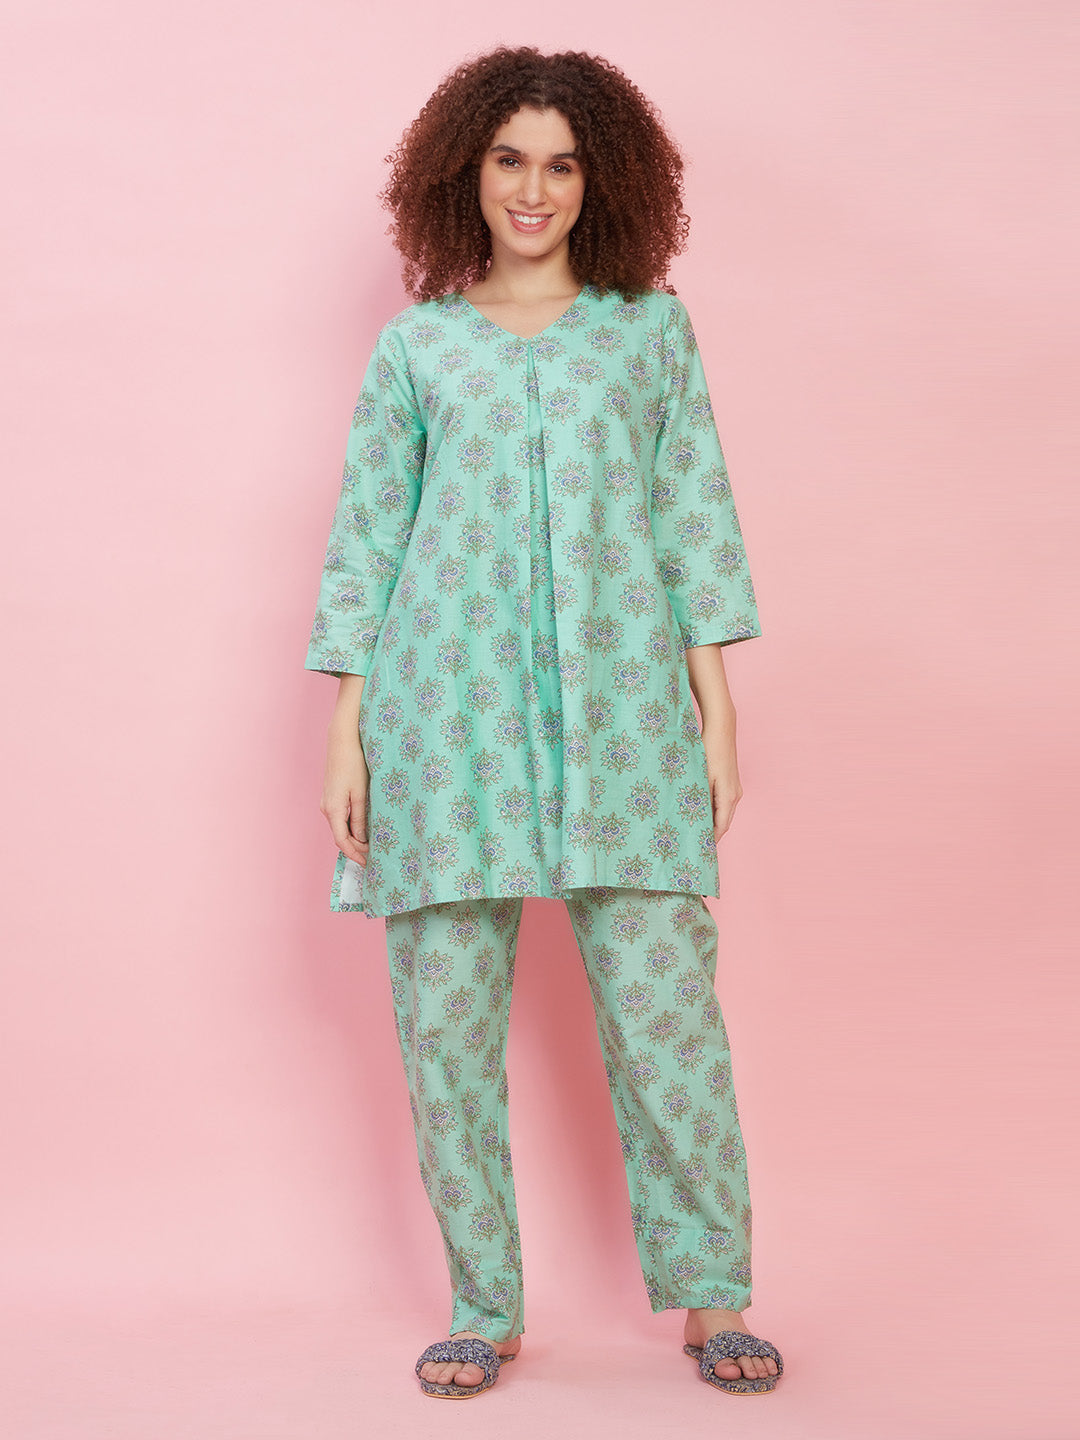 SuperSoft most comfortable 100% Mercerised compact Cotton Pajama set with Pocket. Really long lasting. You will love it. Our Guarantee.